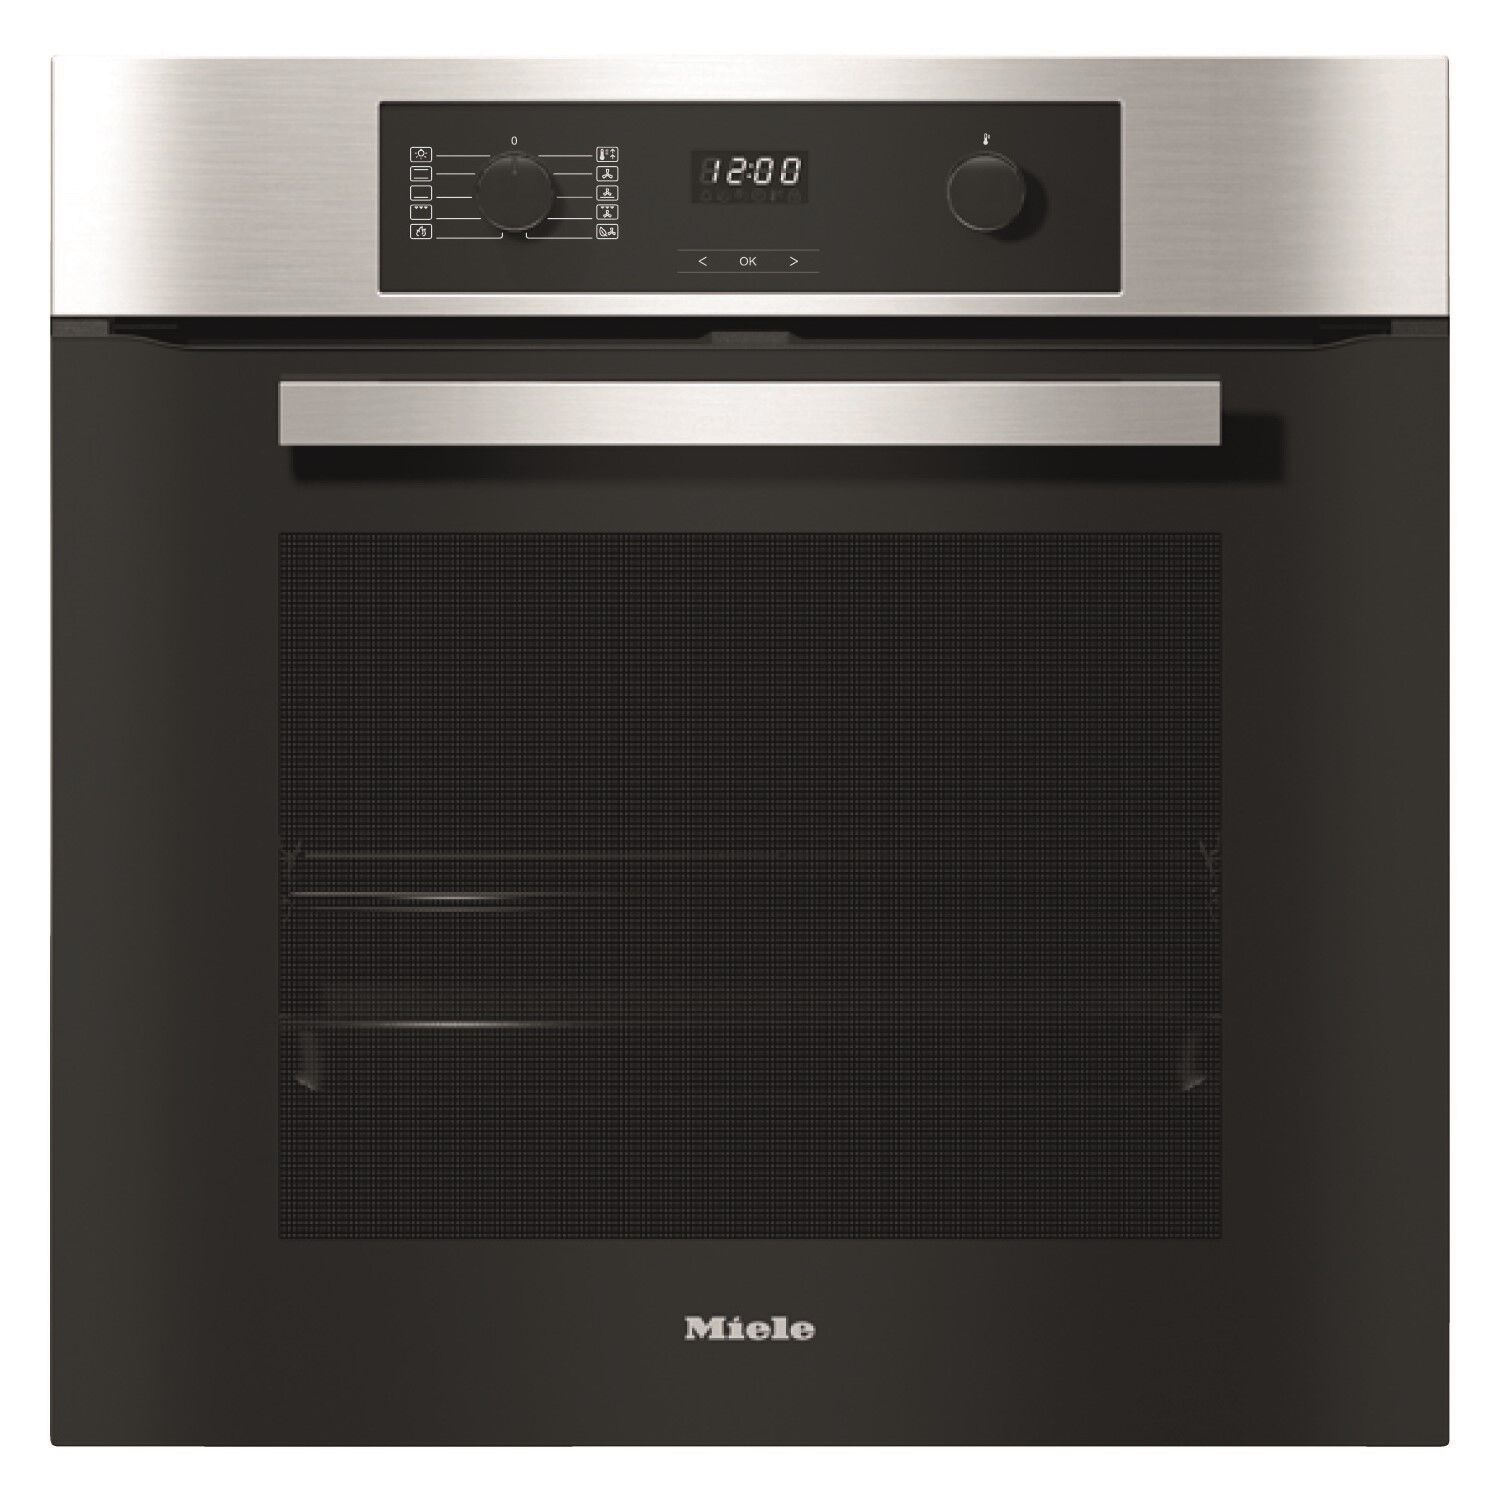 Miele Single Oven with Pyrolytic Cleaning - Clean Steel